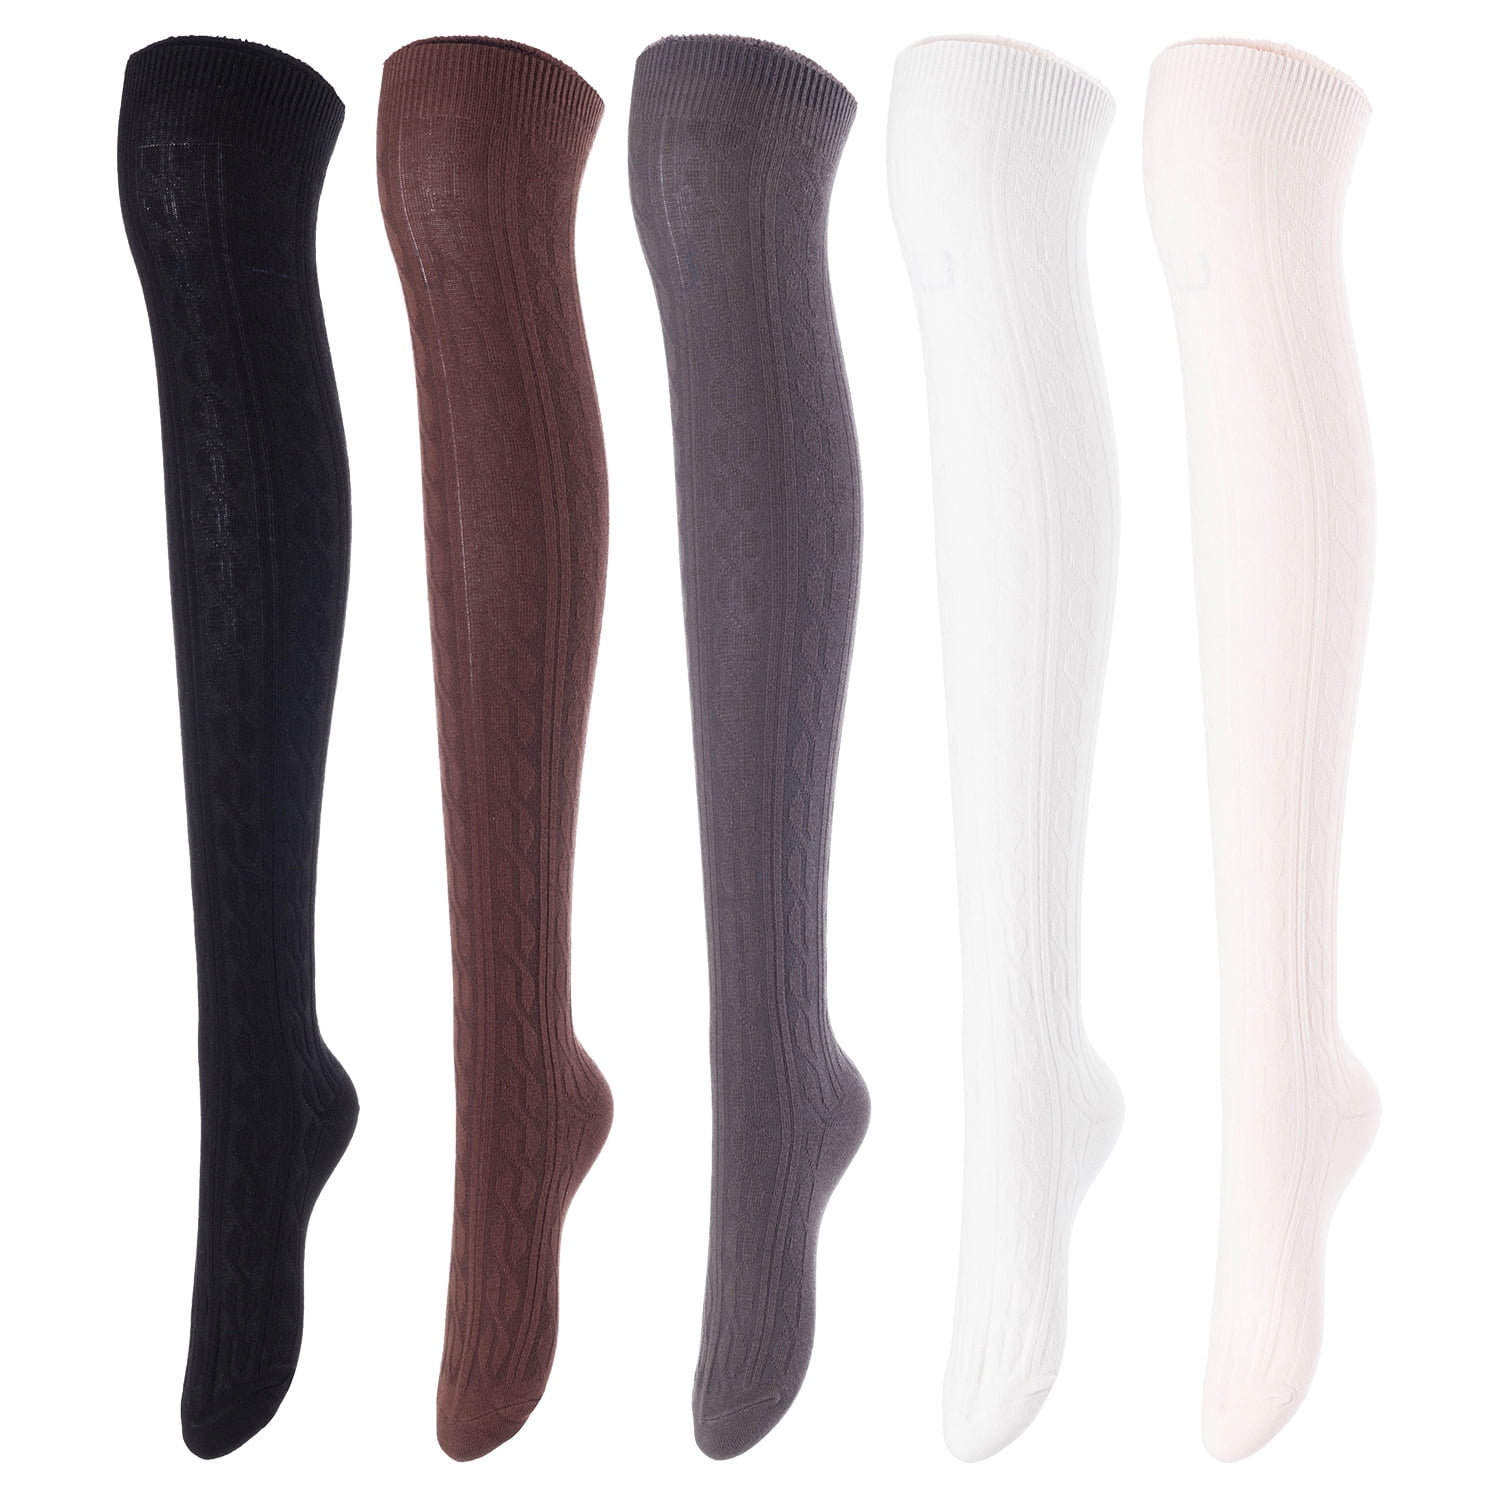 Lovely Annie Womens 5 Pairs Over Knee High Thigh High Cotton Socks A1024 Size 5-9